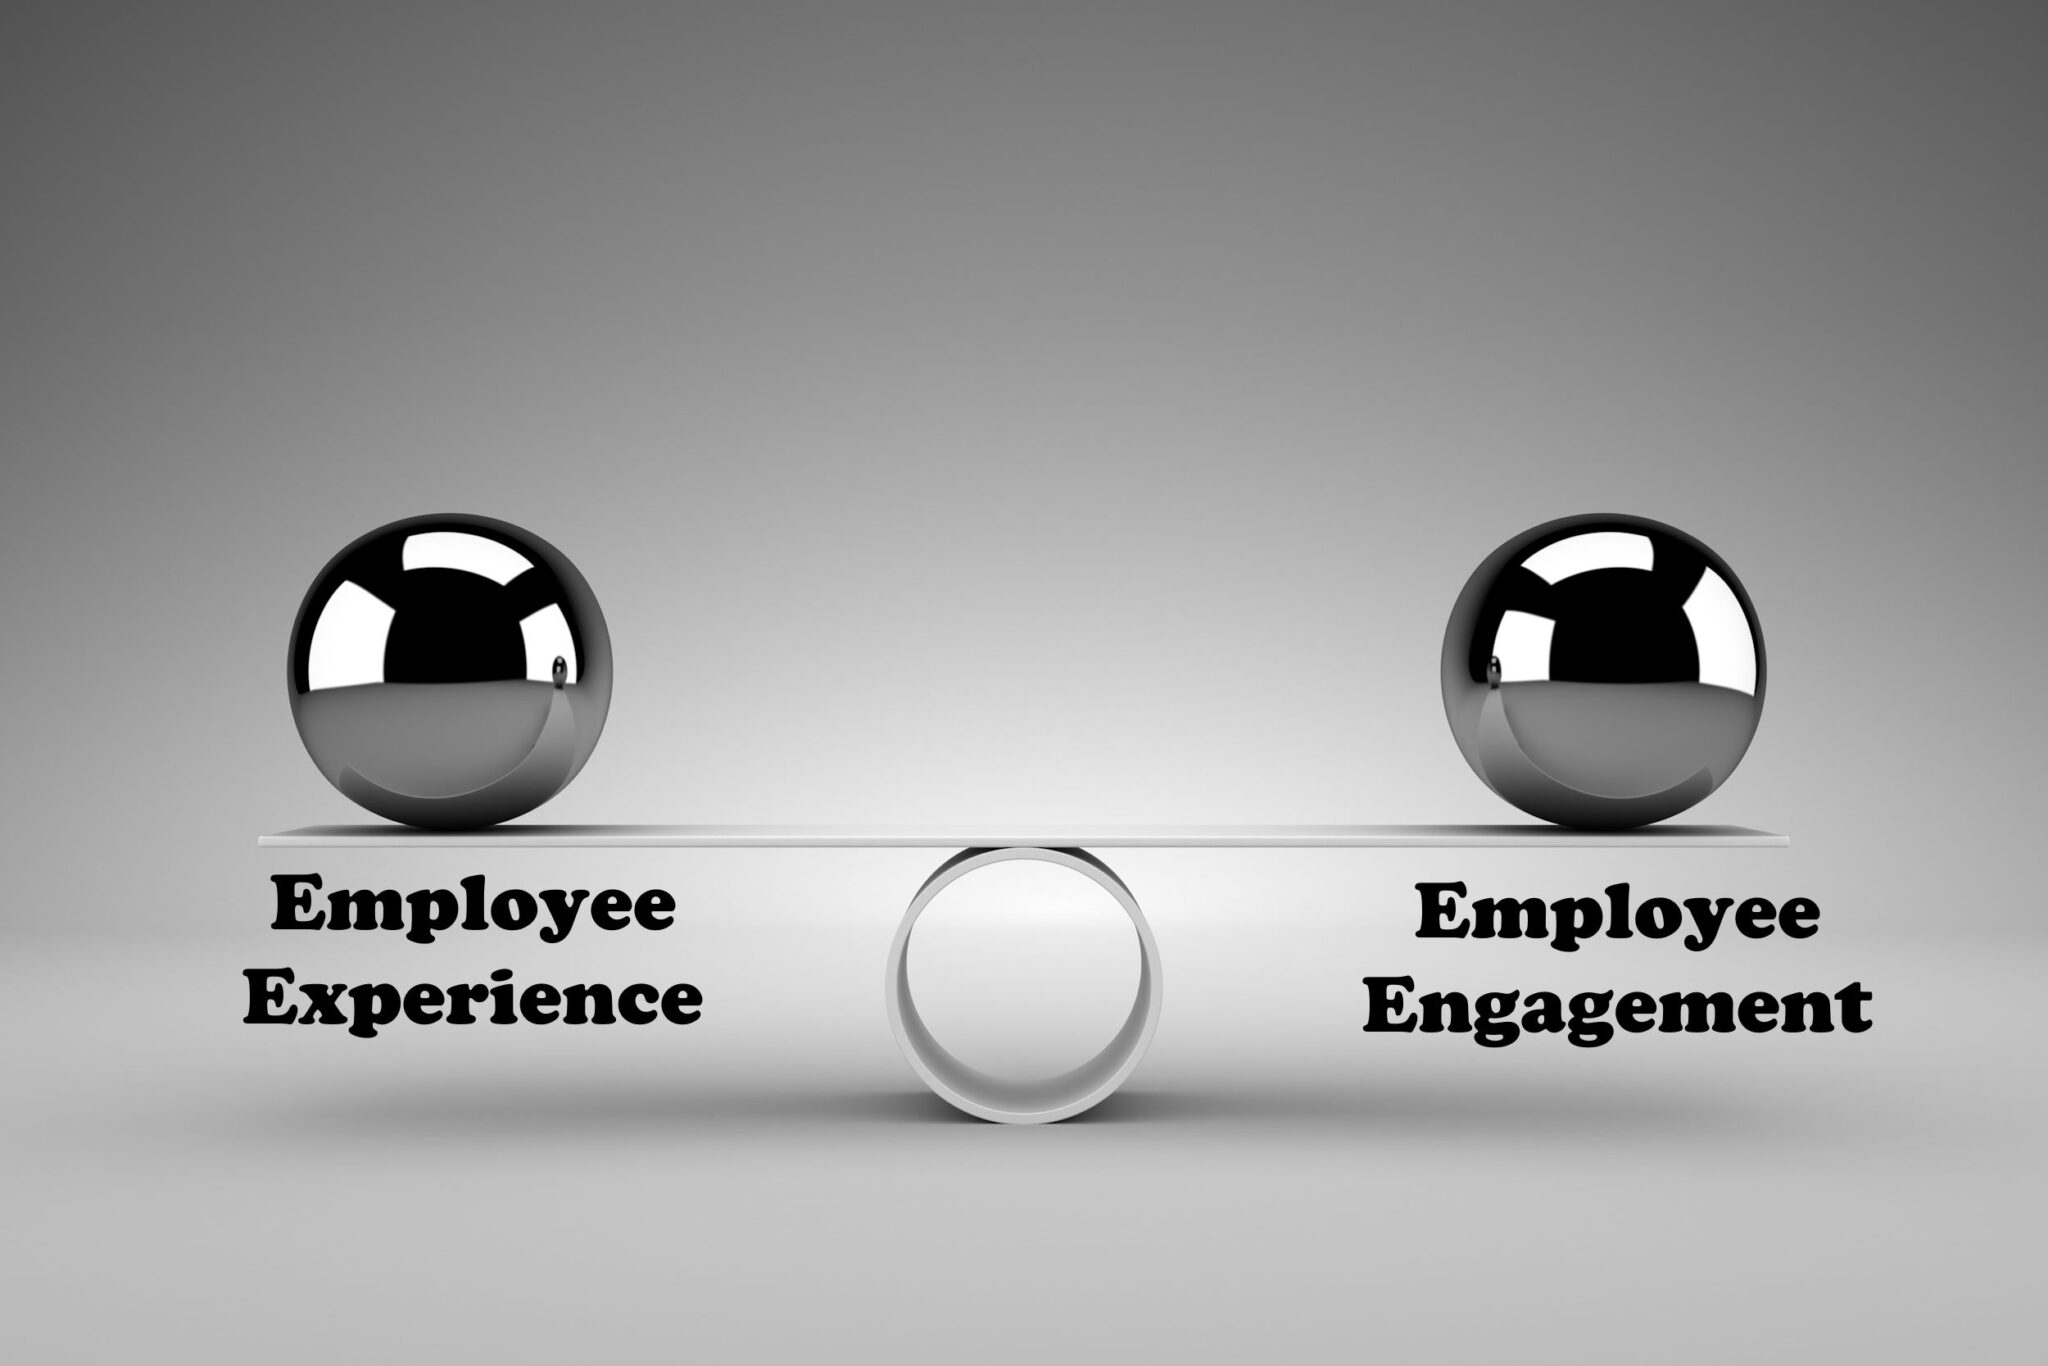 Balancing Employee Experience and Employee Engagement